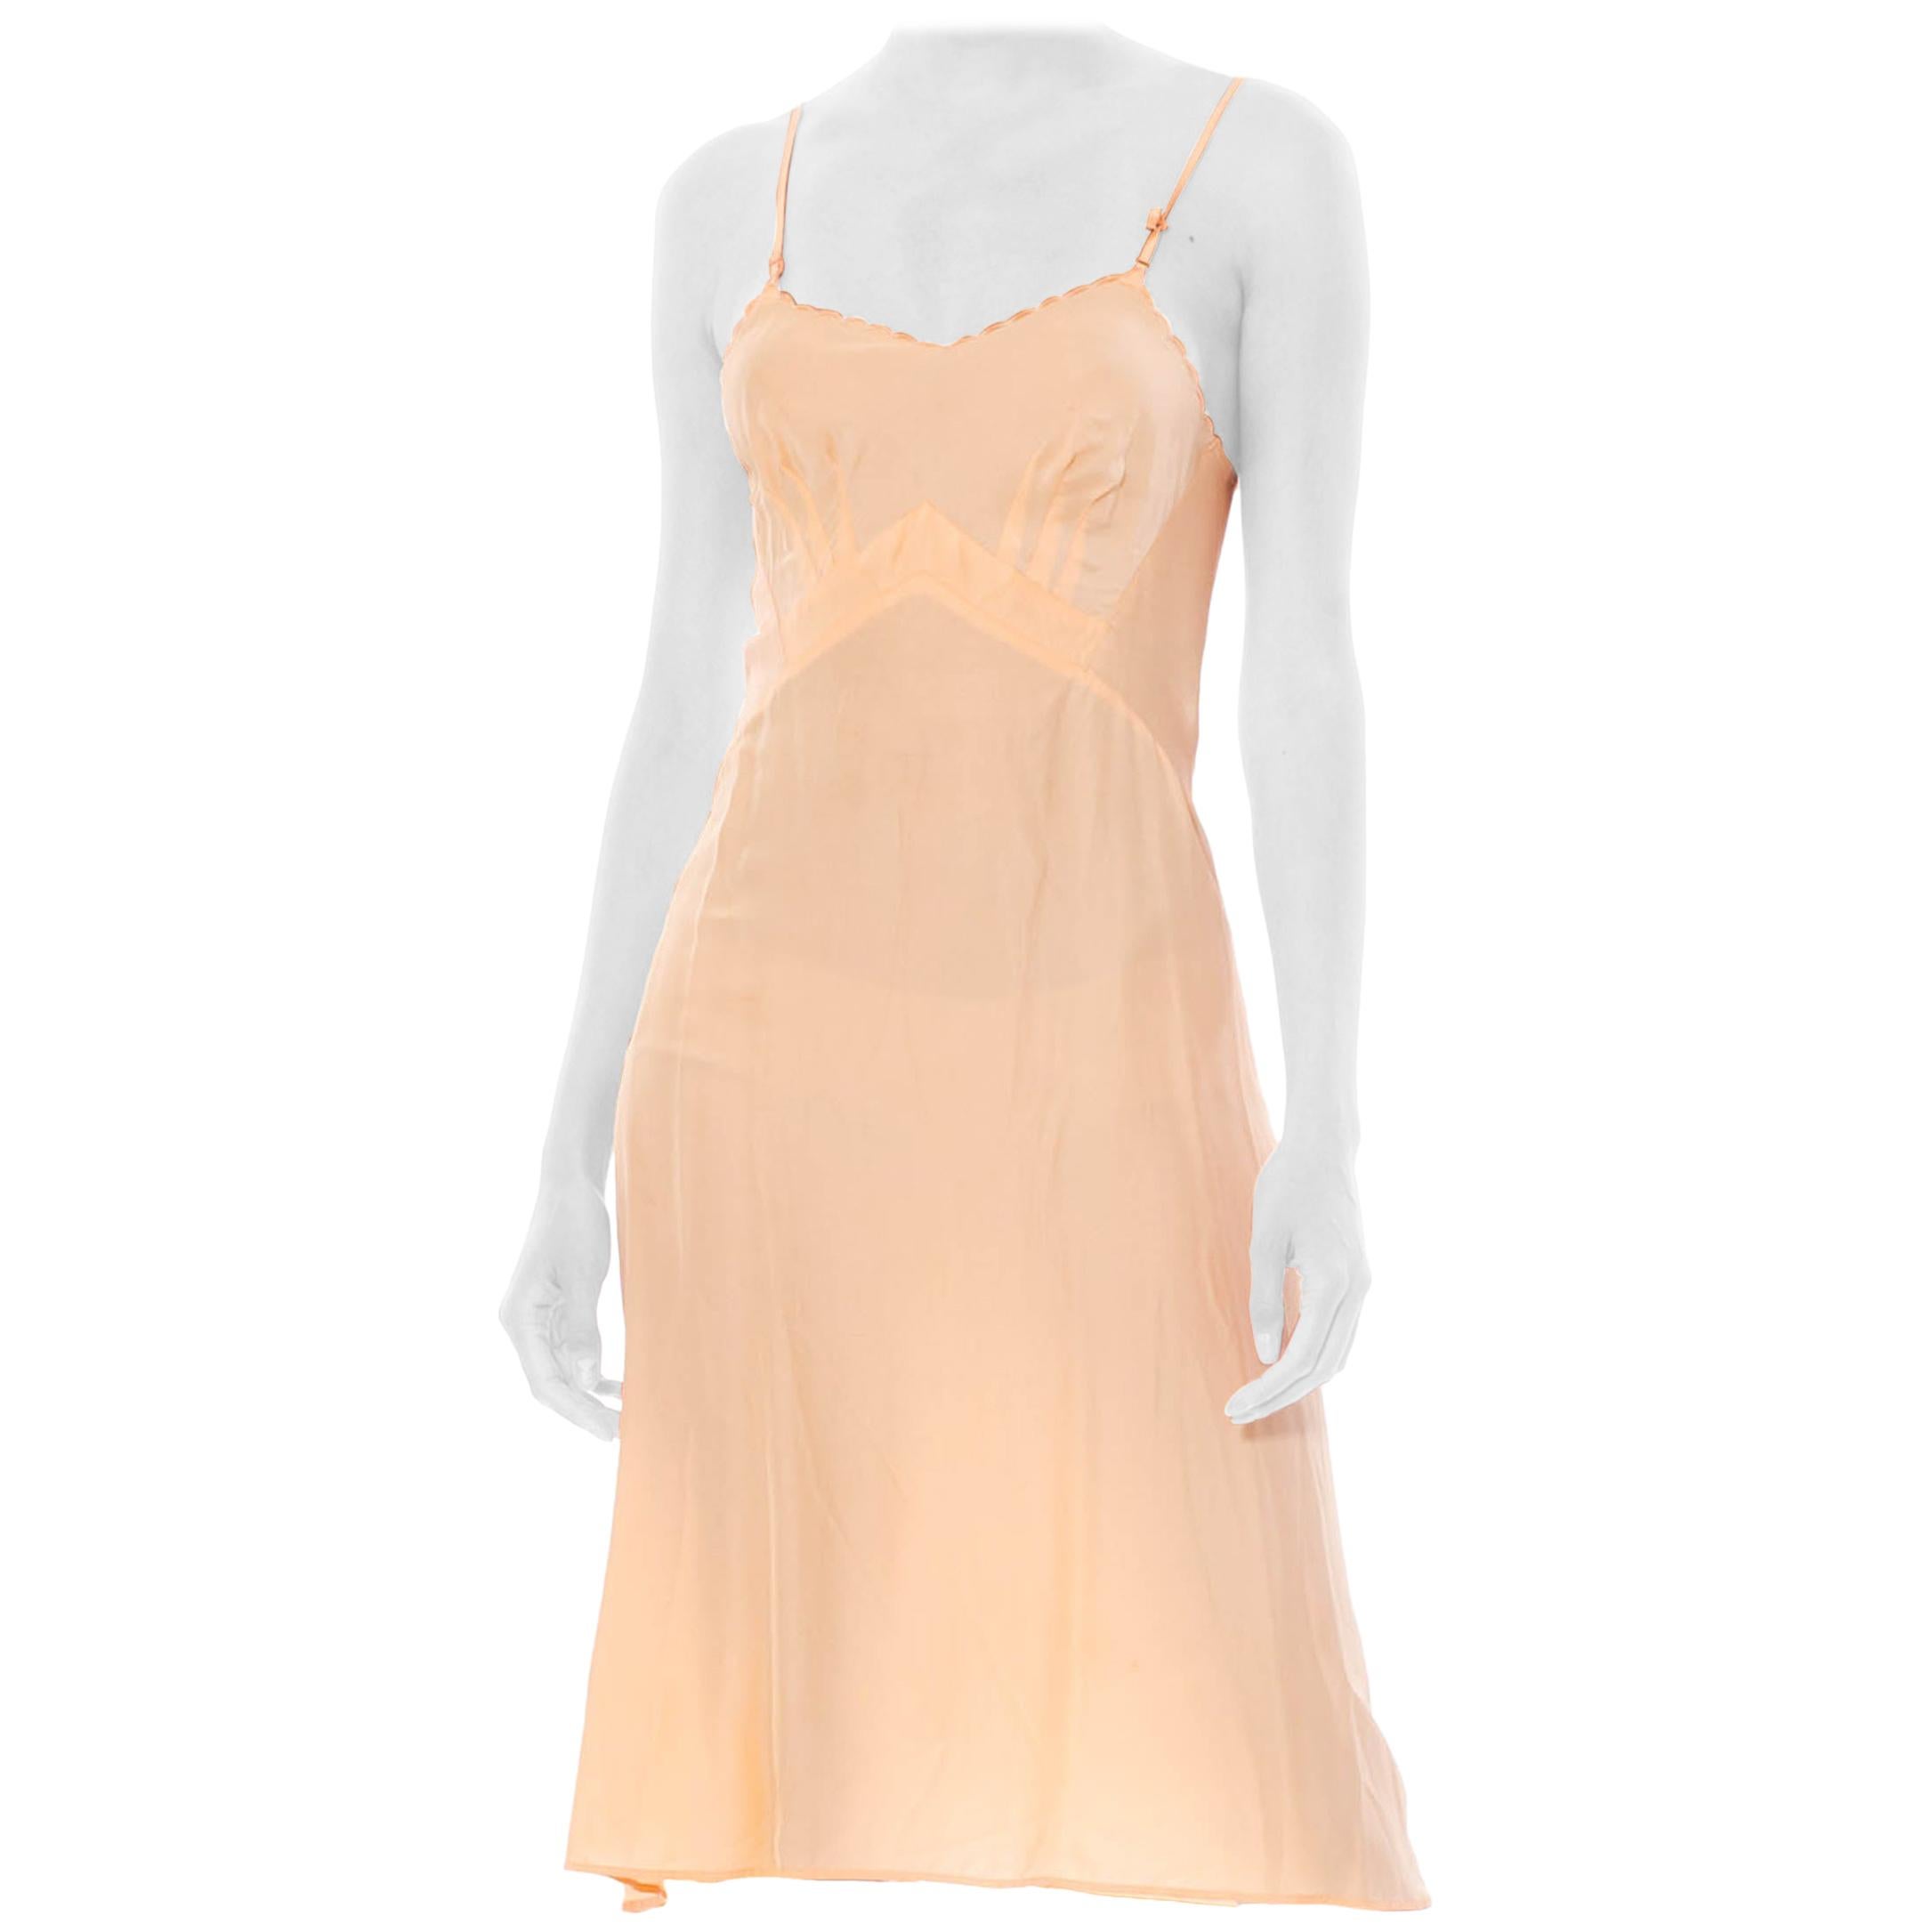 1940S Peach Bias Cut Rayon Slip Dress With Elastic Side Panels For Fit